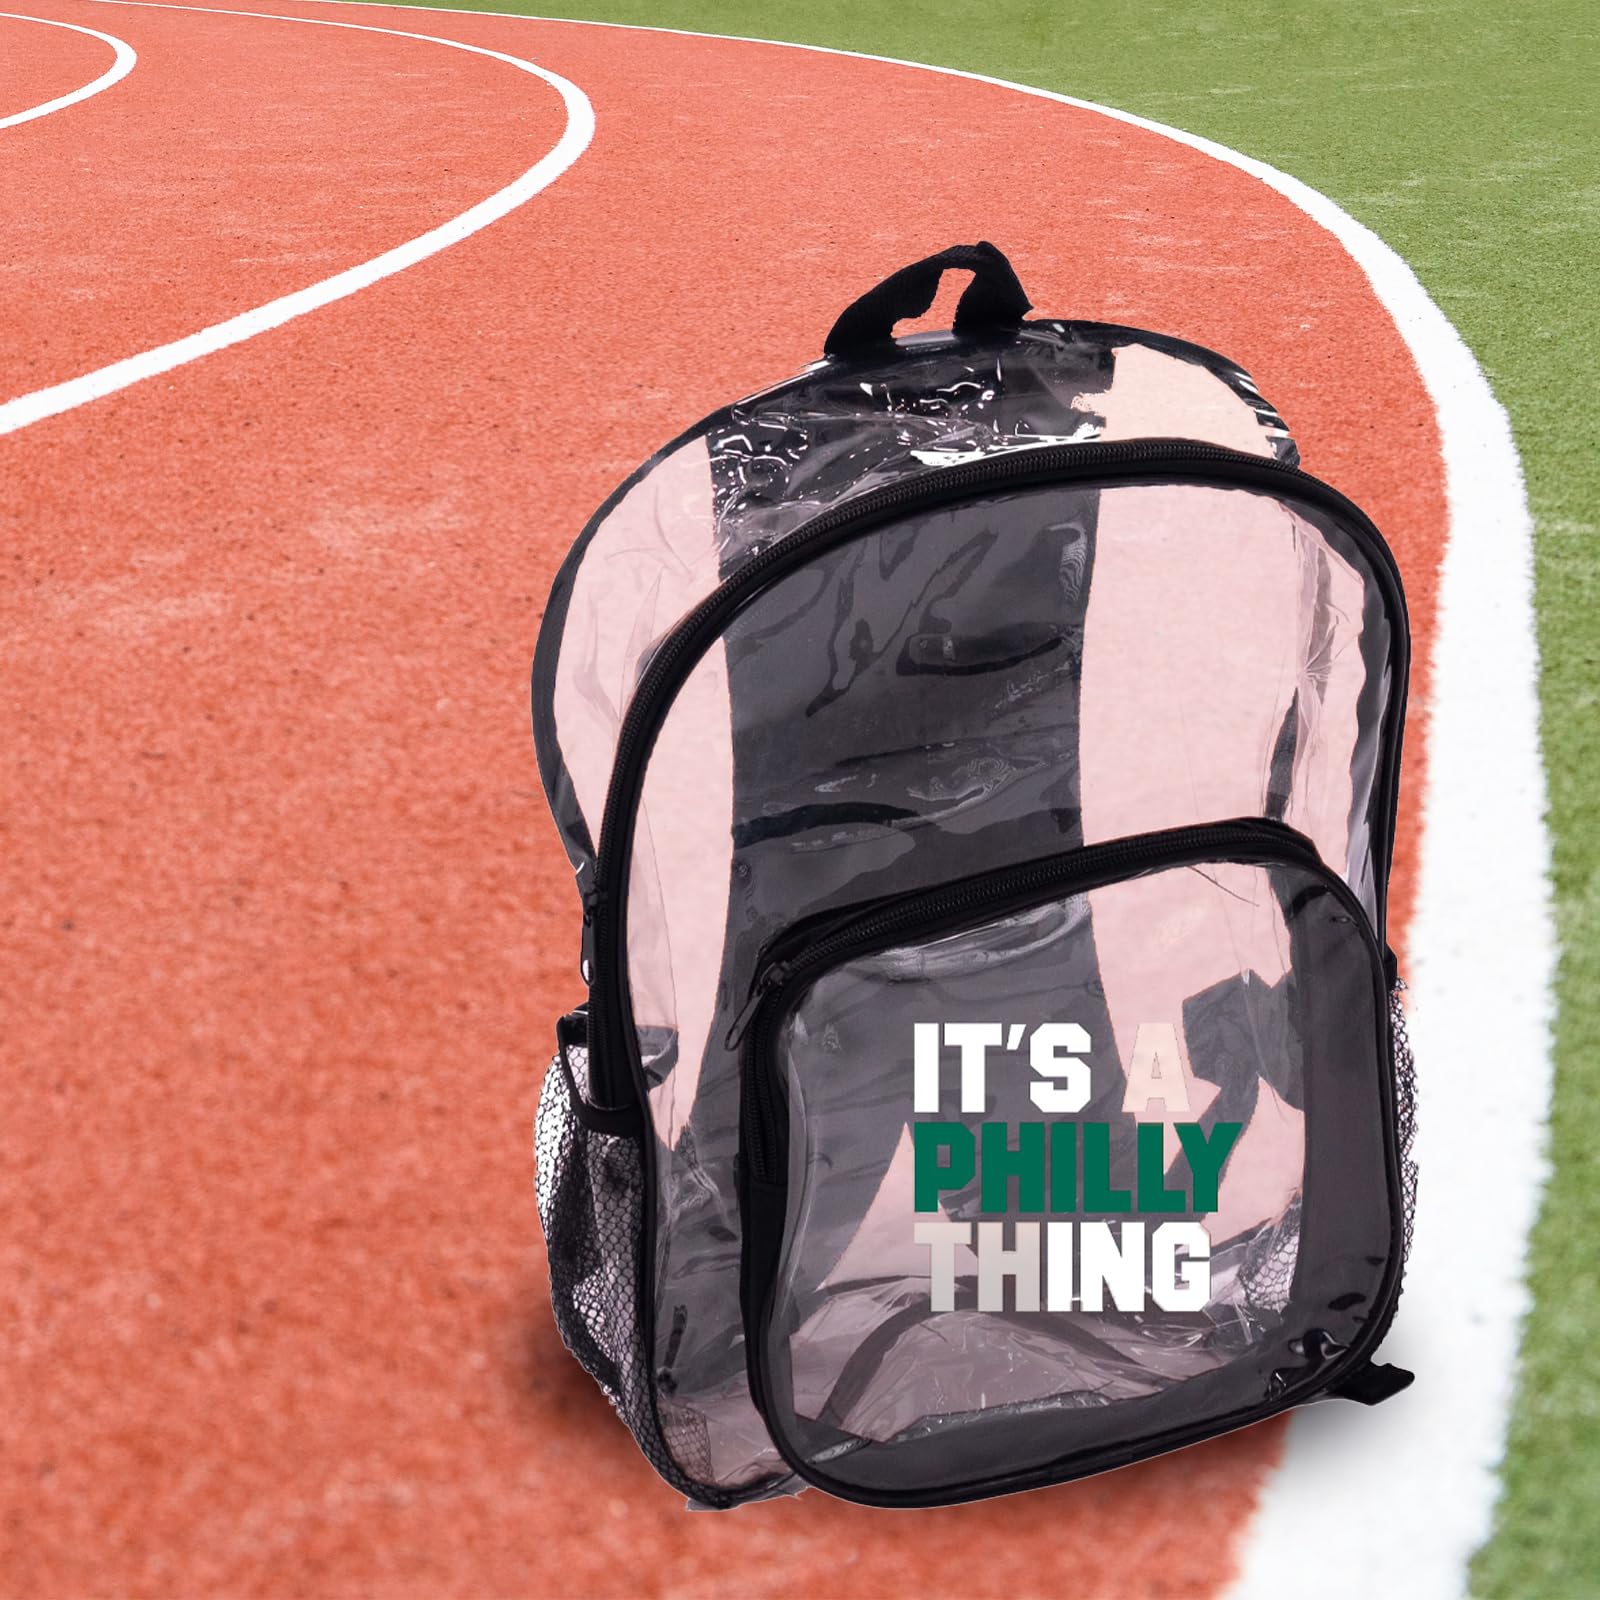 VOS It's Philly Thing - Philadelphia Clear Backpack, Heavy Duty & Transparent See Through Backpack, Perfect for Sporting Events, Concerts